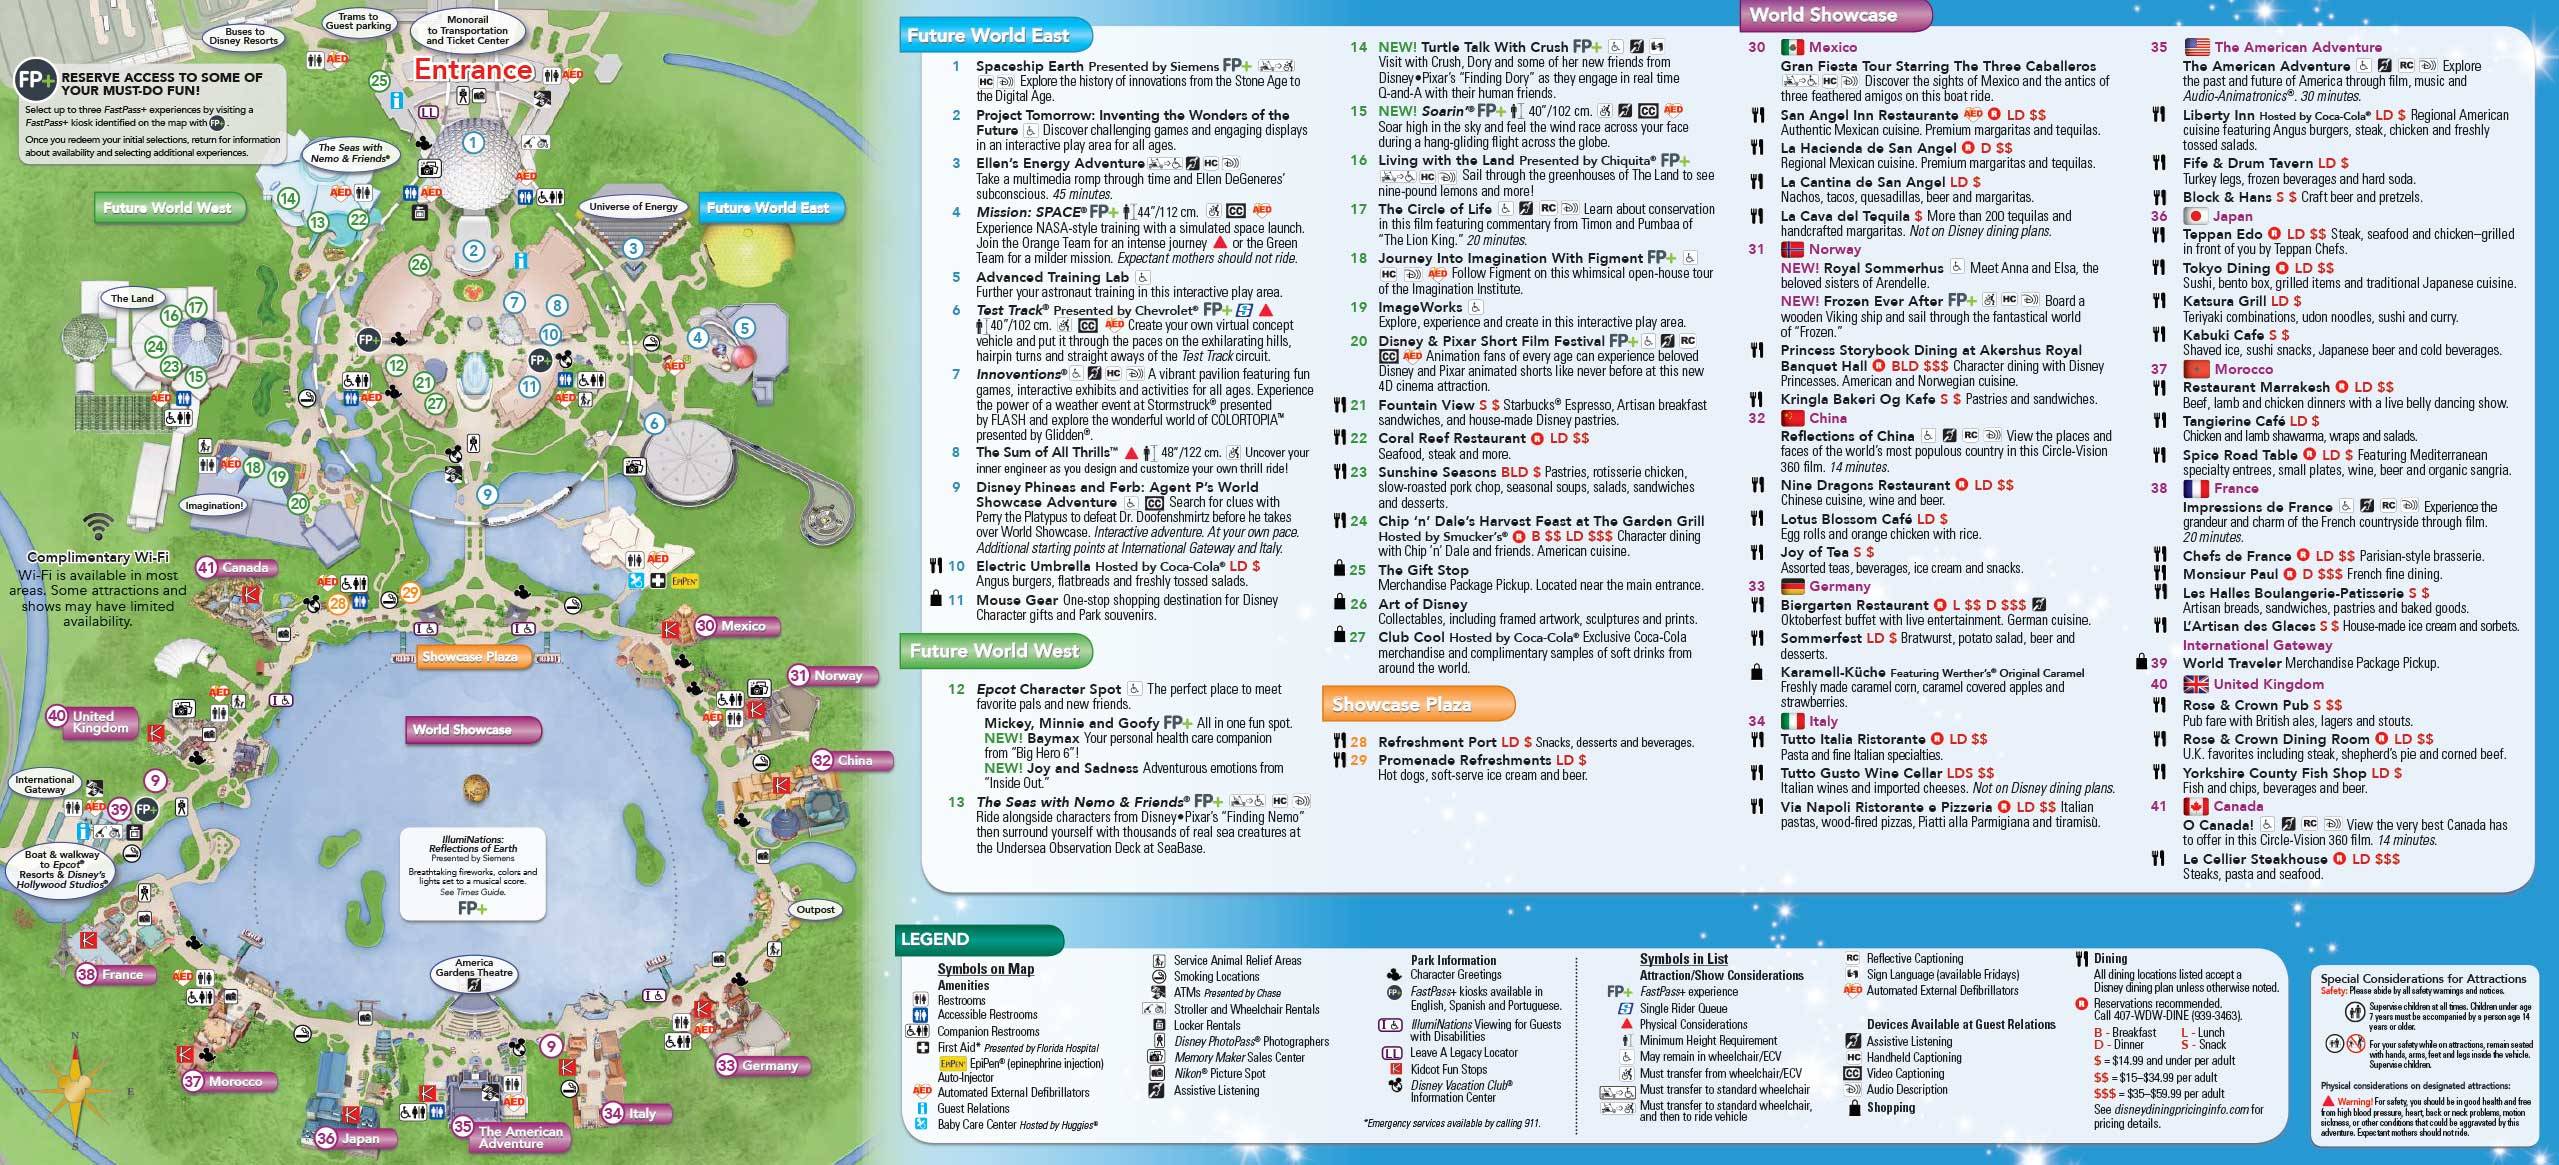 Epcot guide map June 2016 - Back